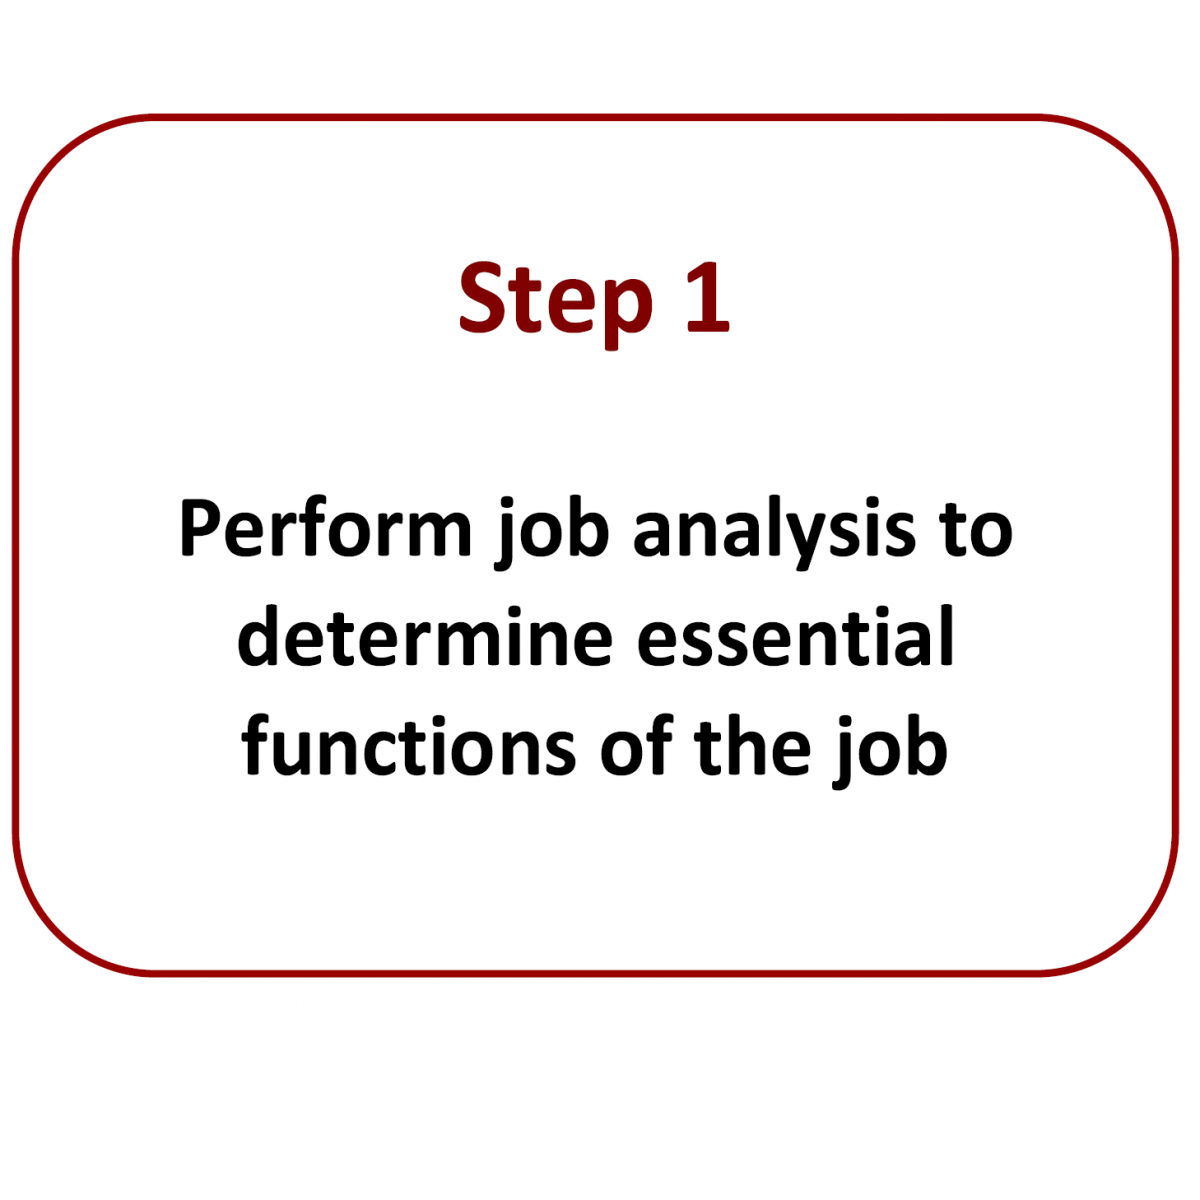 Step 1: Perform job analysis to determine essential functions of the job